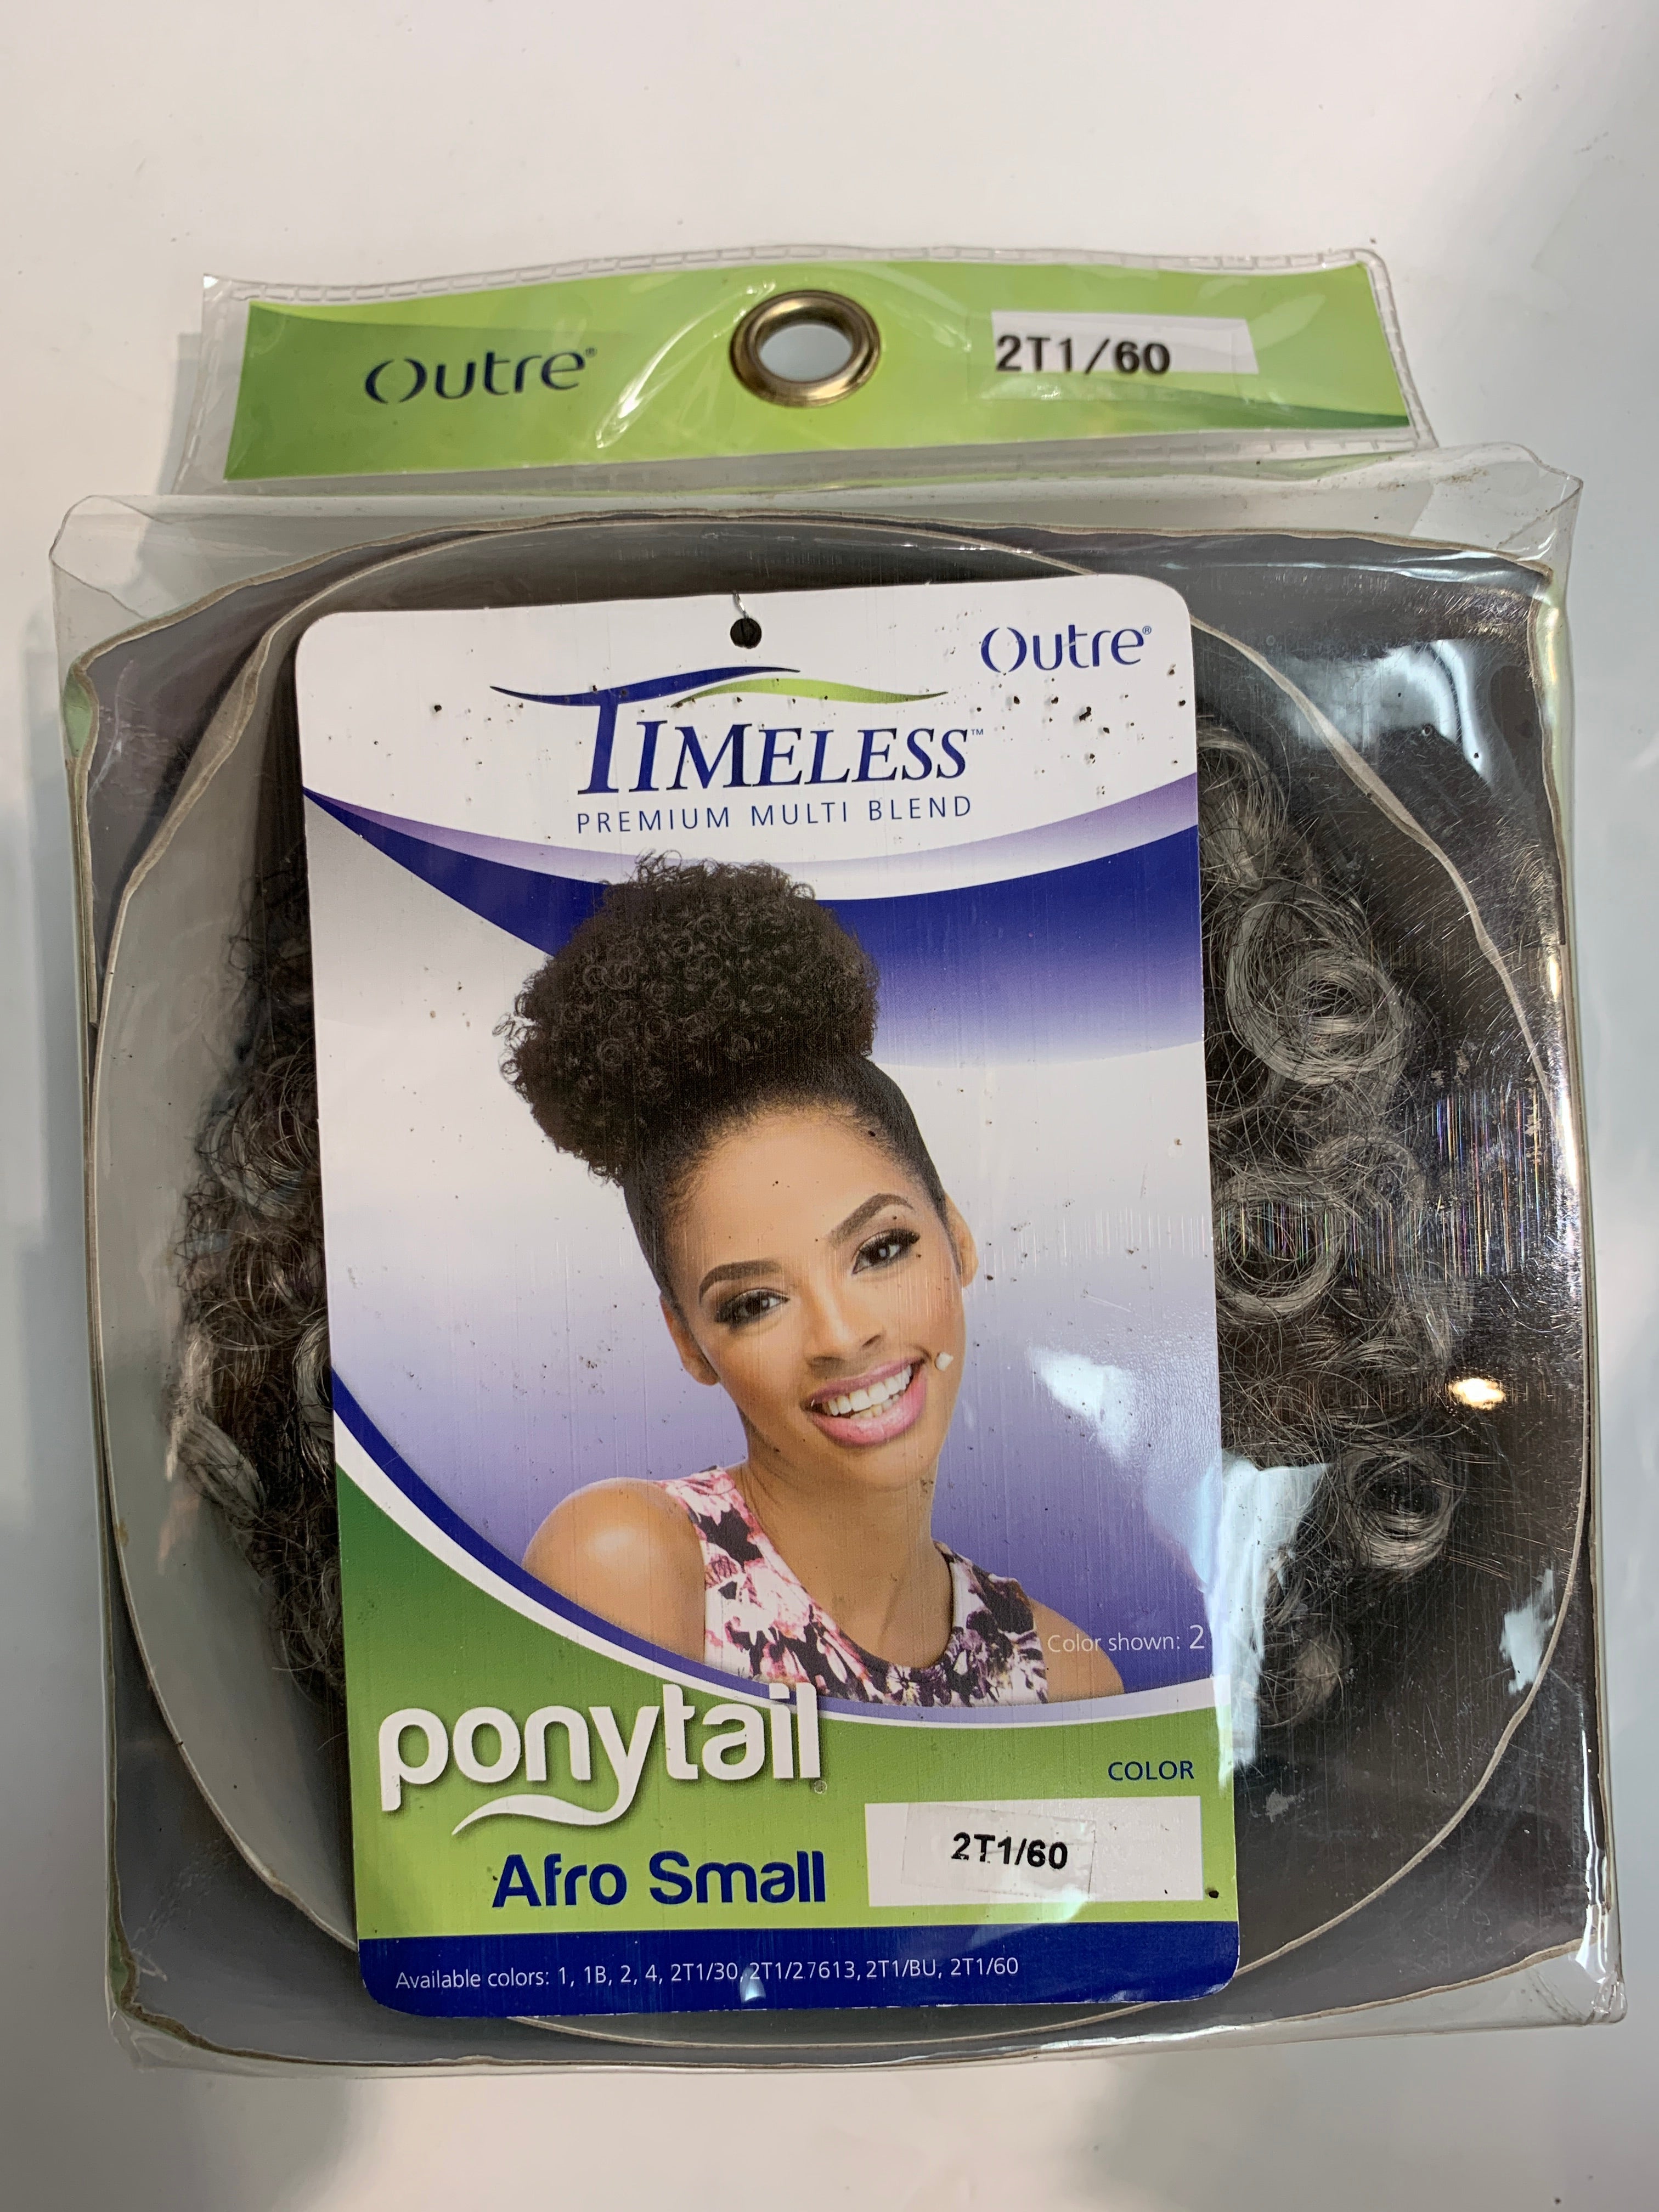 Outre ponytail Afro small